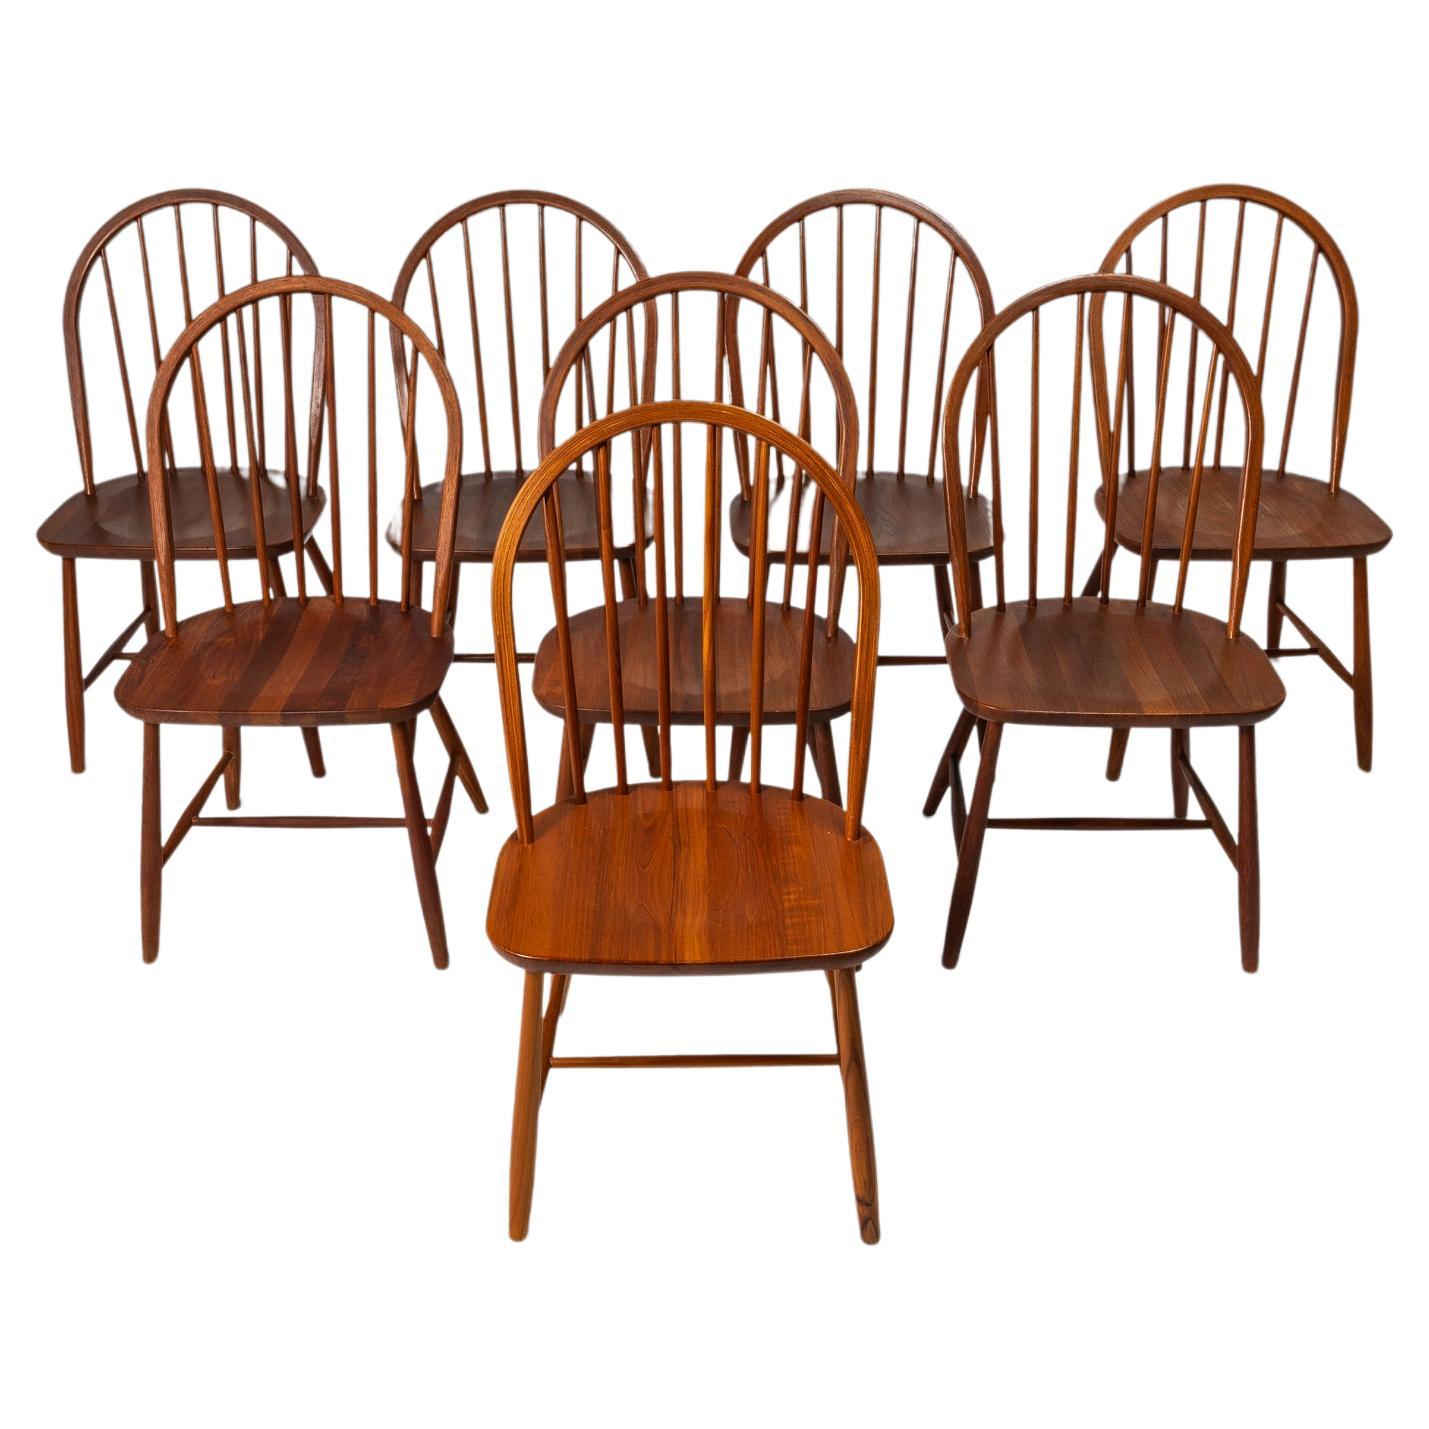 Set of 8 Windsor Dining Chairs by Erik Ole Jørgens for Tarm Stole, Denmark, 1960 For Sale